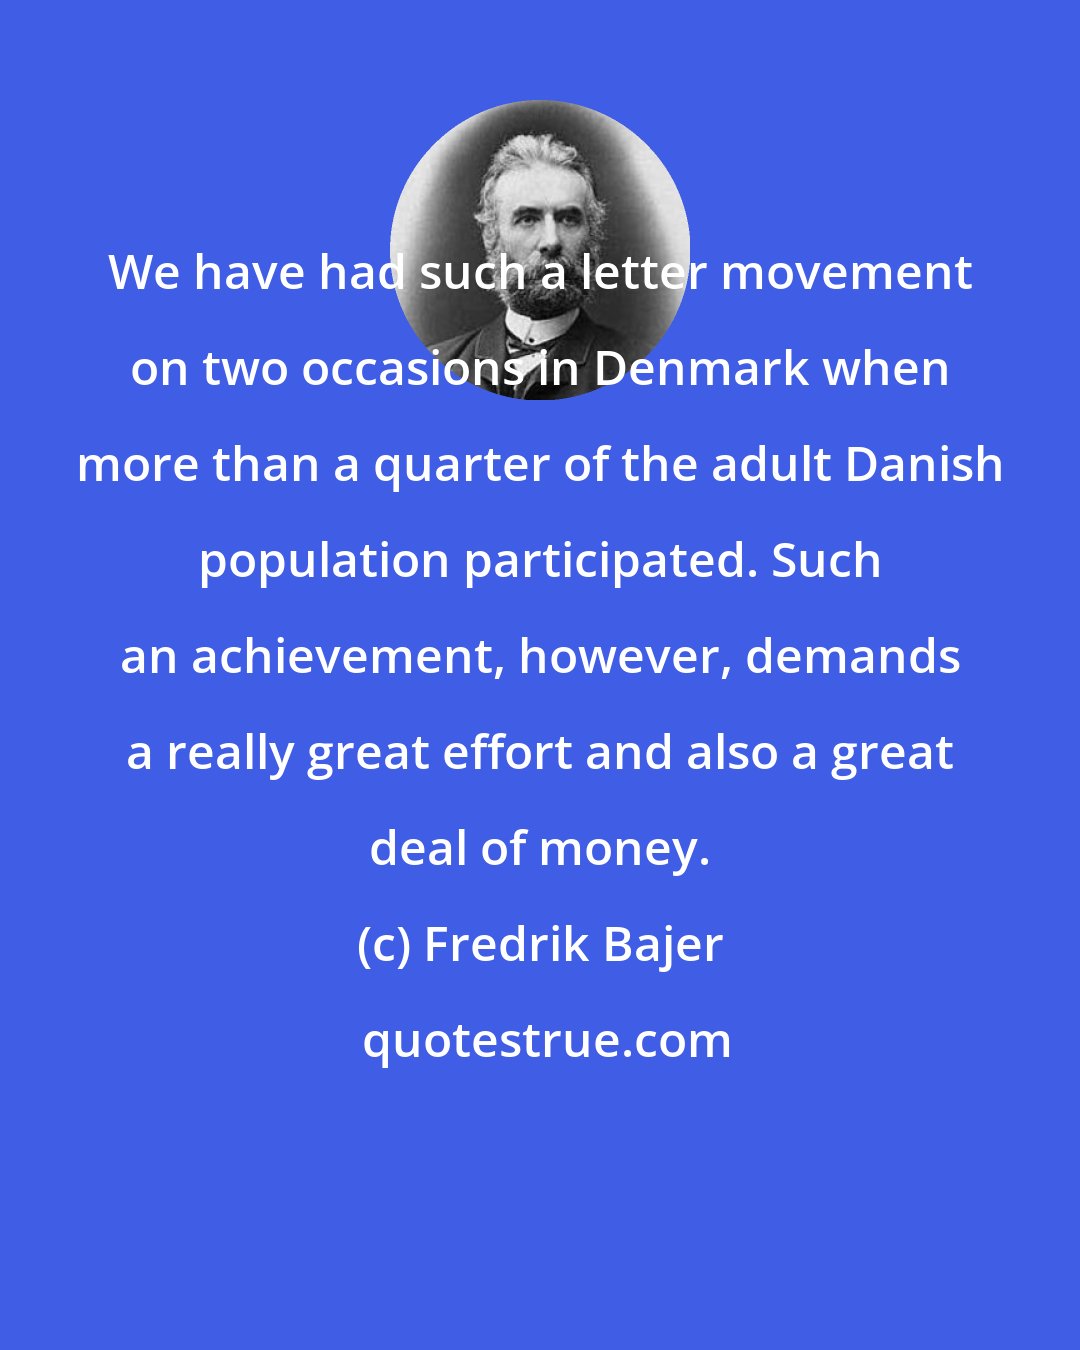 Fredrik Bajer: We have had such a letter movement on two occasions in Denmark when more than a quarter of the adult Danish population participated. Such an achievement, however, demands a really great effort and also a great deal of money.